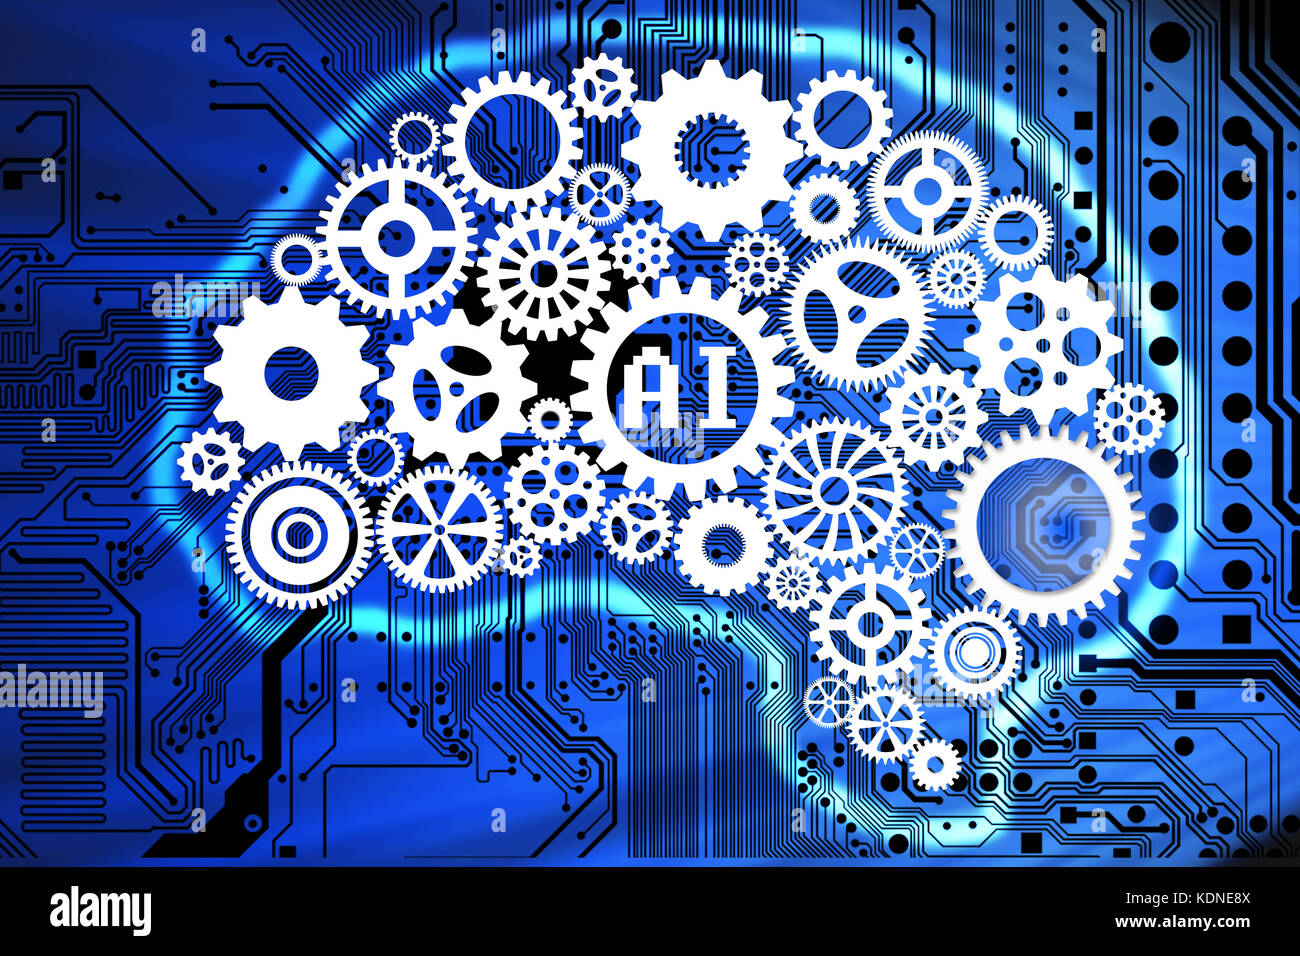 Artificial intelligence concept with human brain shape from gears on computer motherboard background Stock Photo